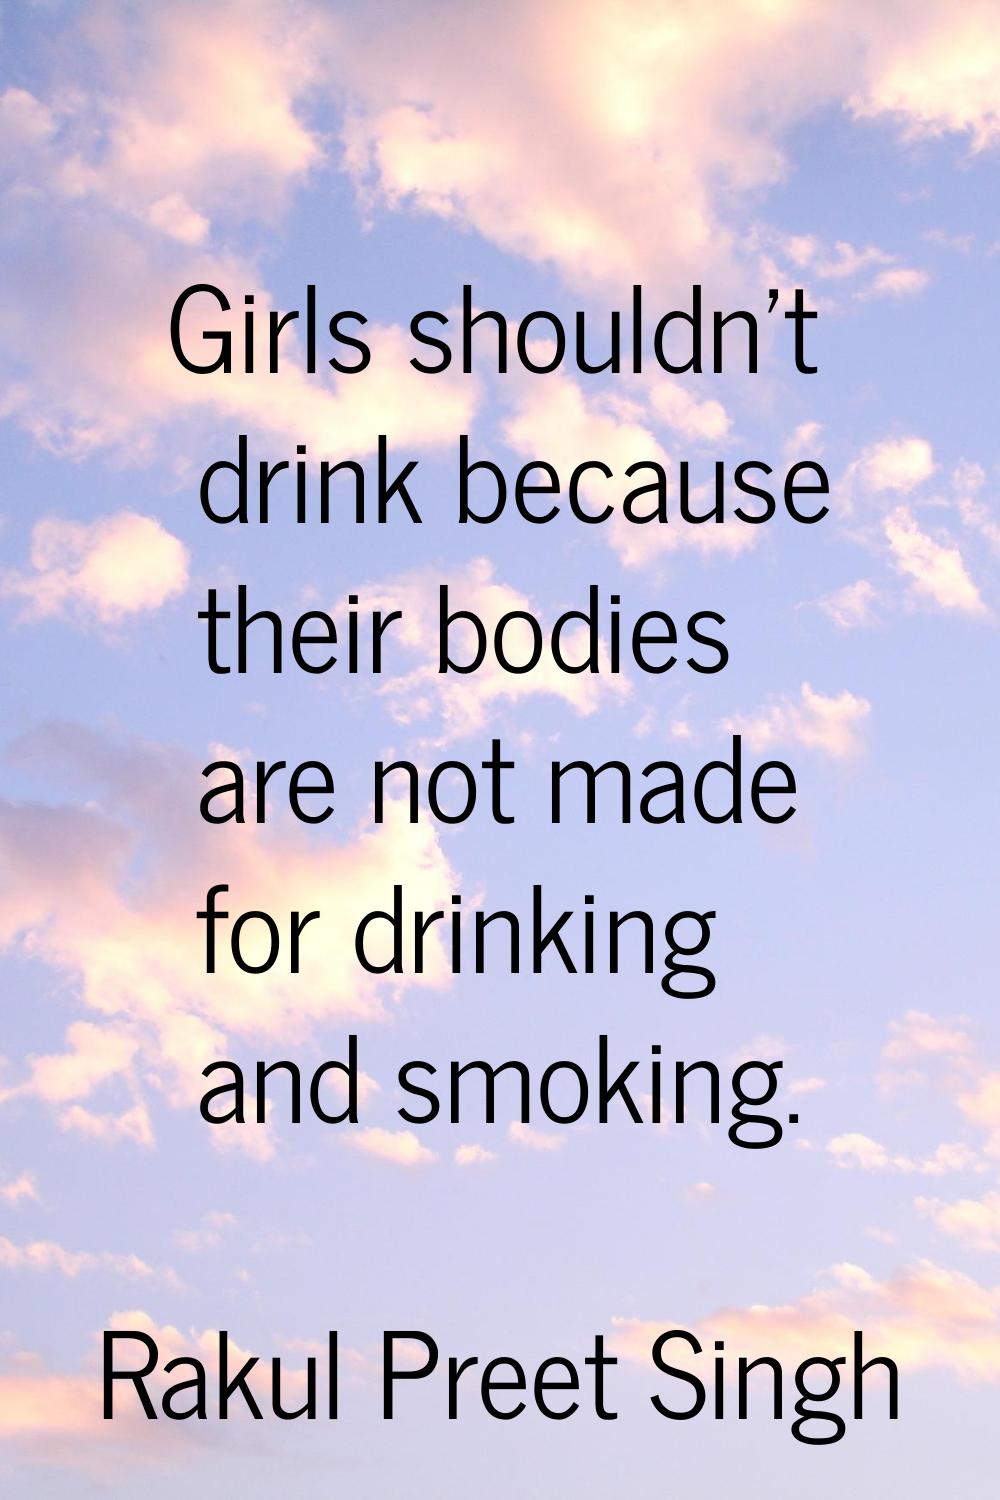 Girls shouldn't drink because their bodies are not made for drinking and smoking.